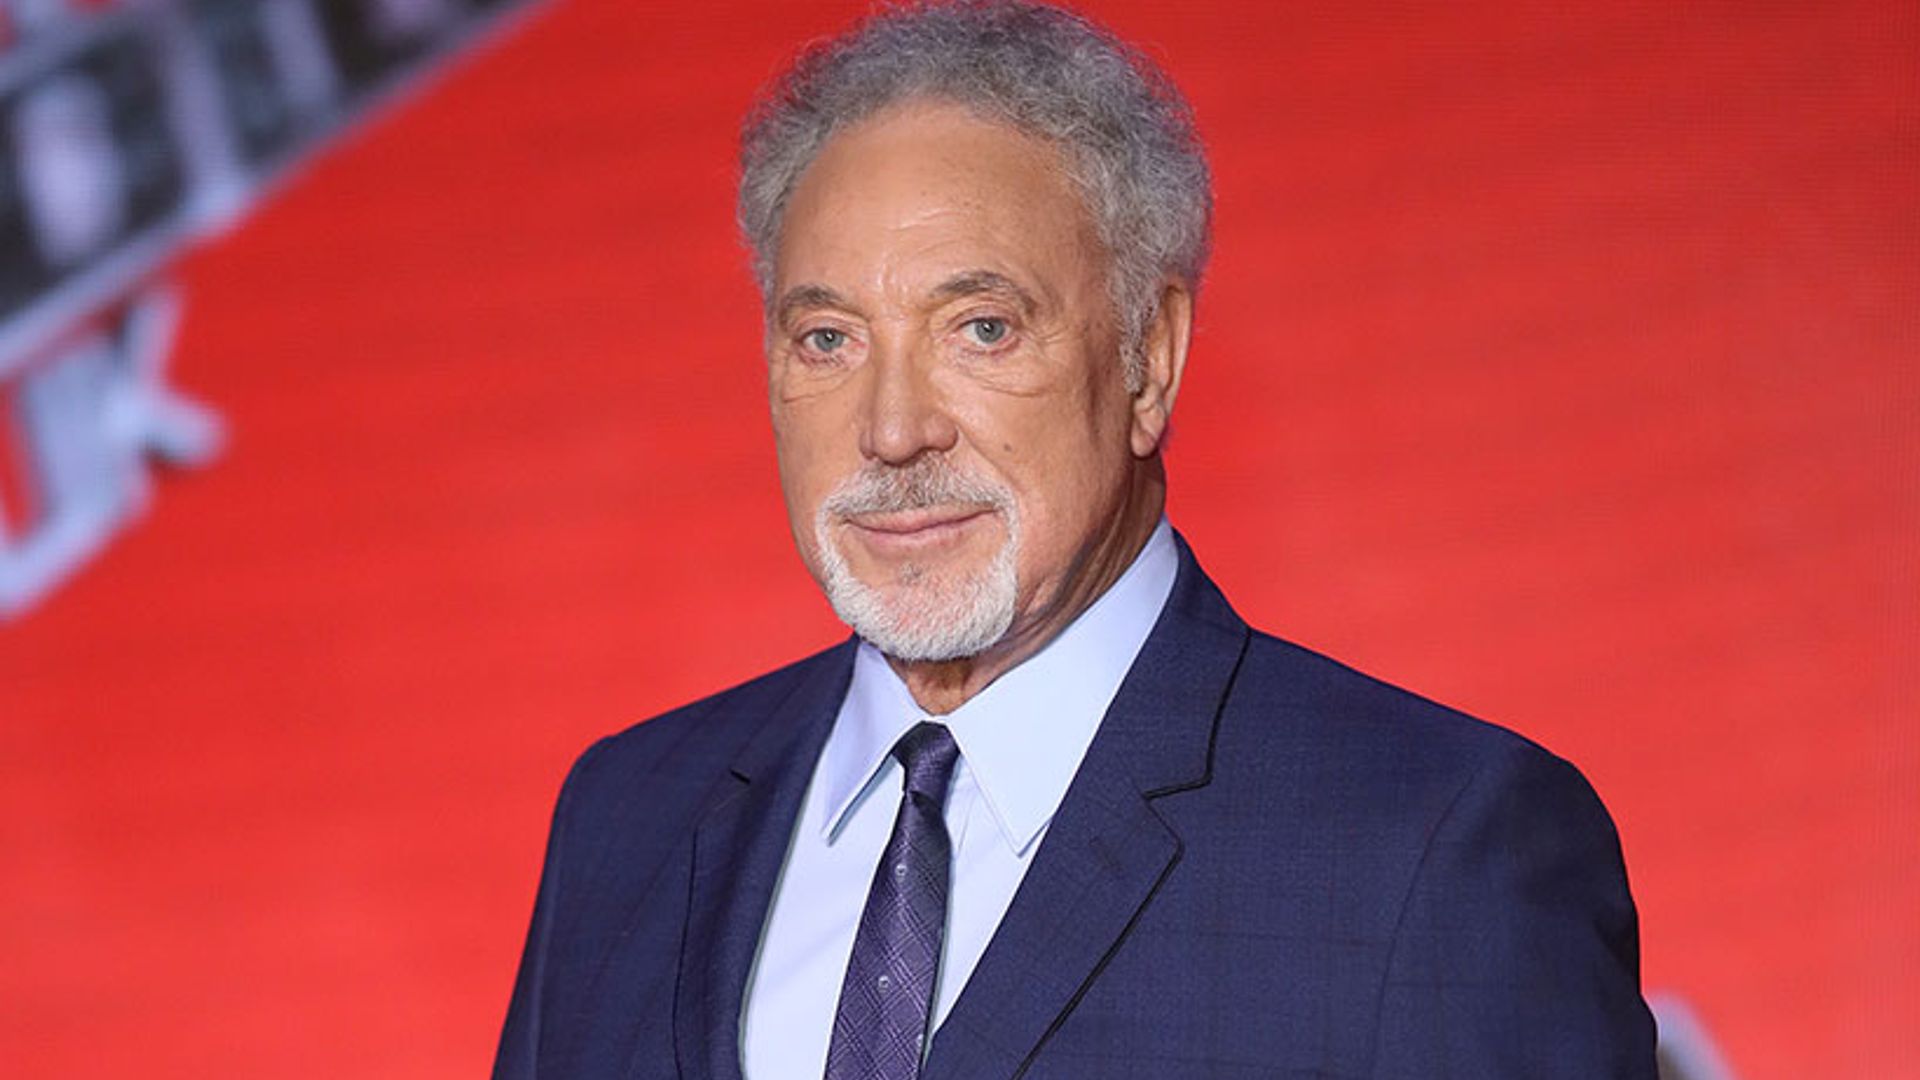 Sir Tom Jones reveals he was assaulted in the music industry